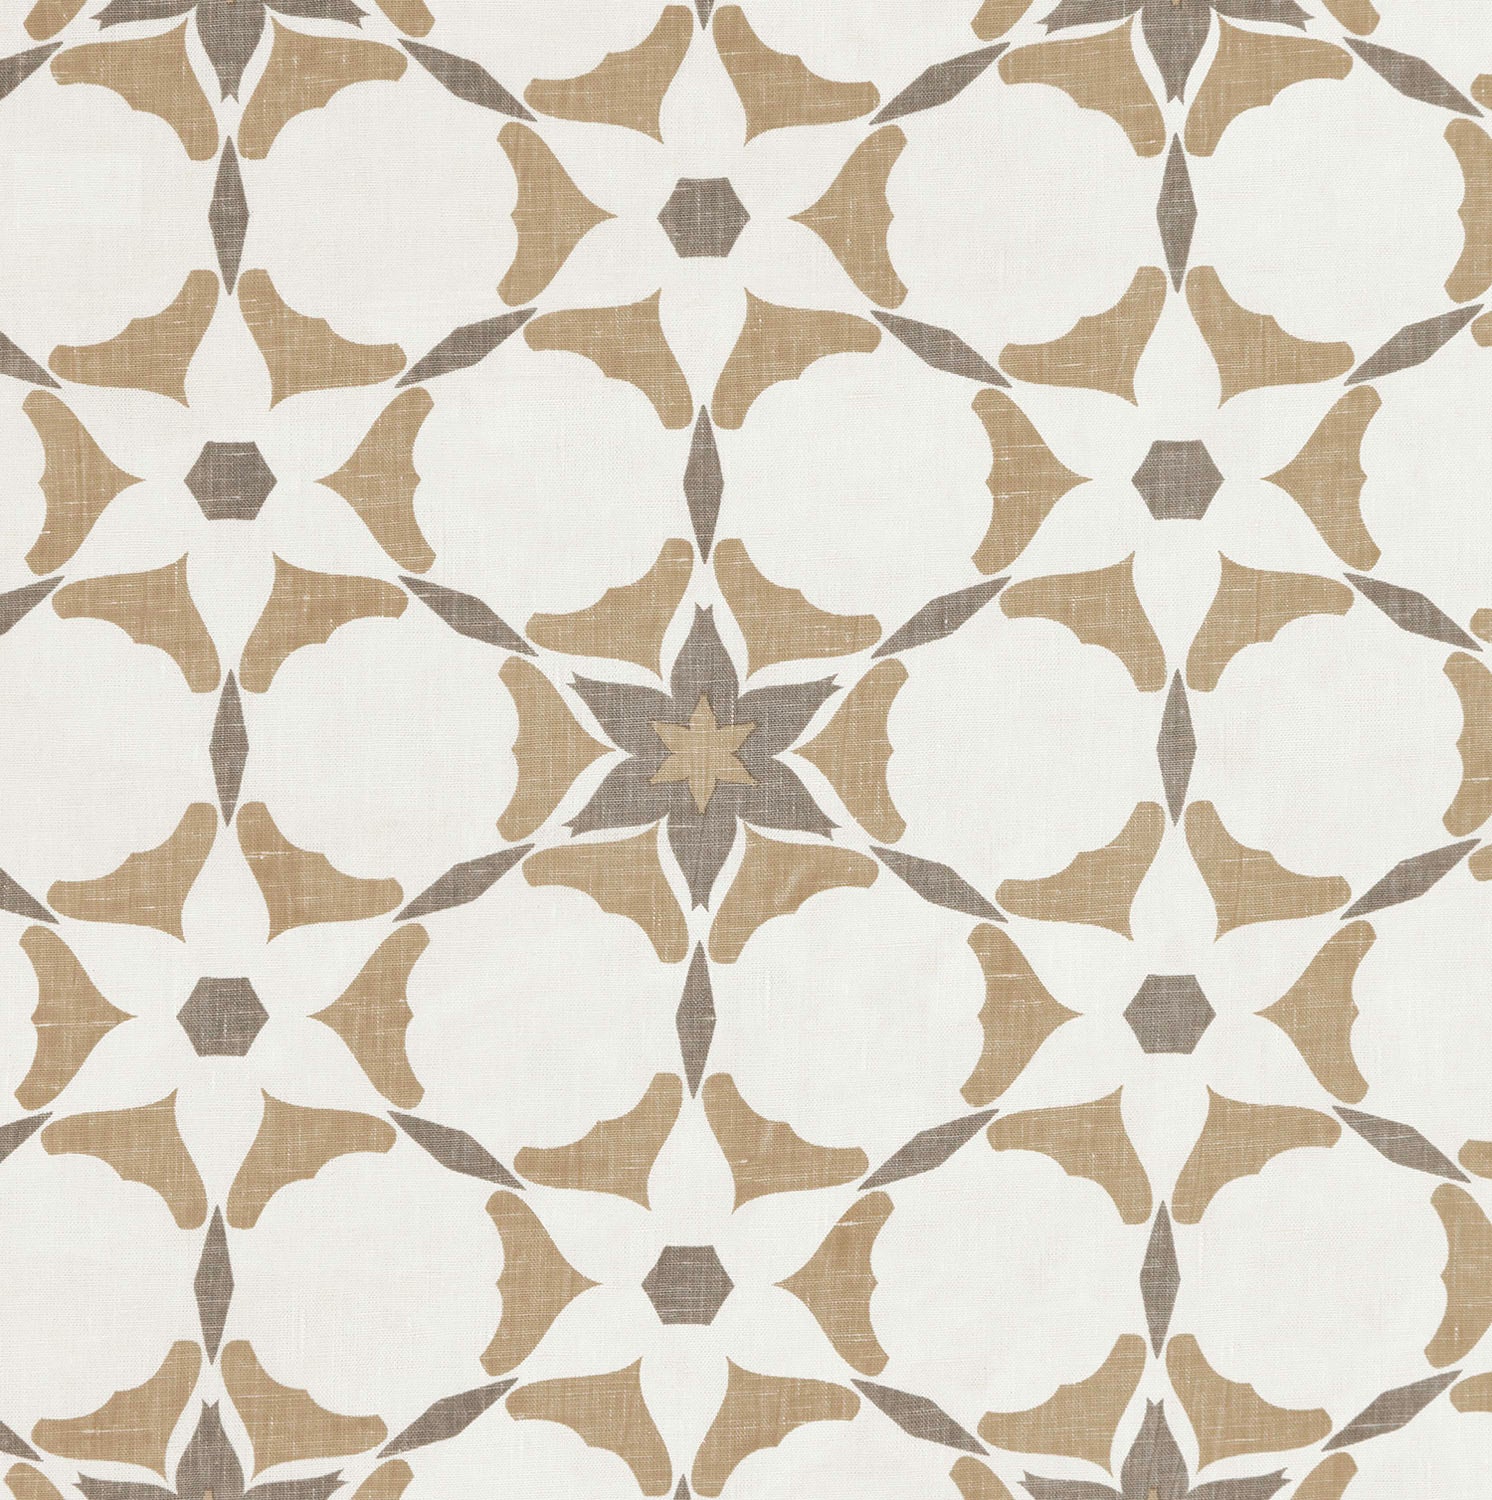 Detail of fabric in a geometric star print in shades of brown and tan on a white field.